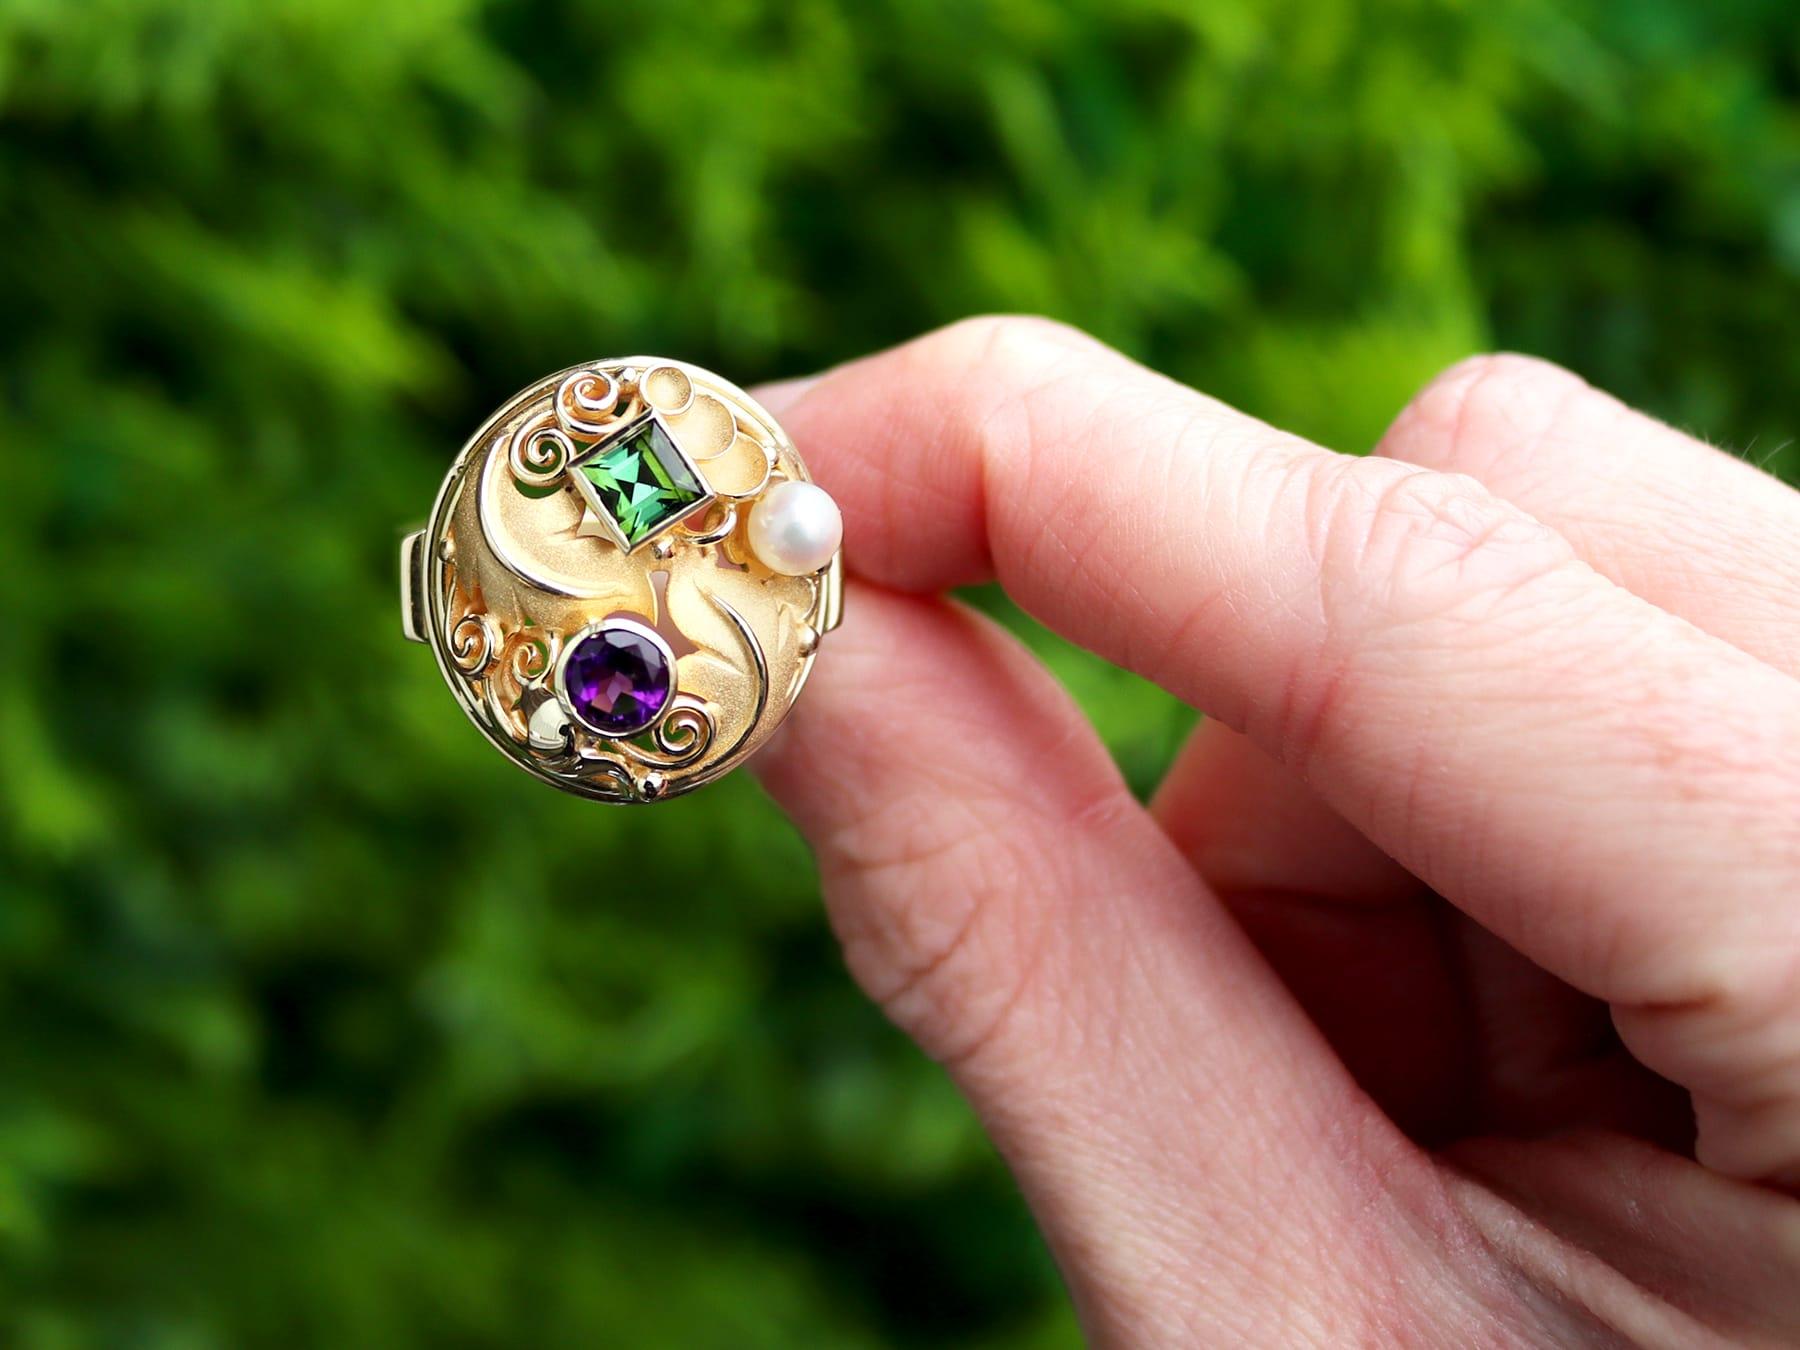 A fine and impressive vintage German 1940's pearl, 0.33 carat tourmaline, 0.30 carat amethyst and 14 karat yellow gold dress ring; part of our dress rings collection.

This fine and impressive vintage dress ring has been crafted in 14k yellow